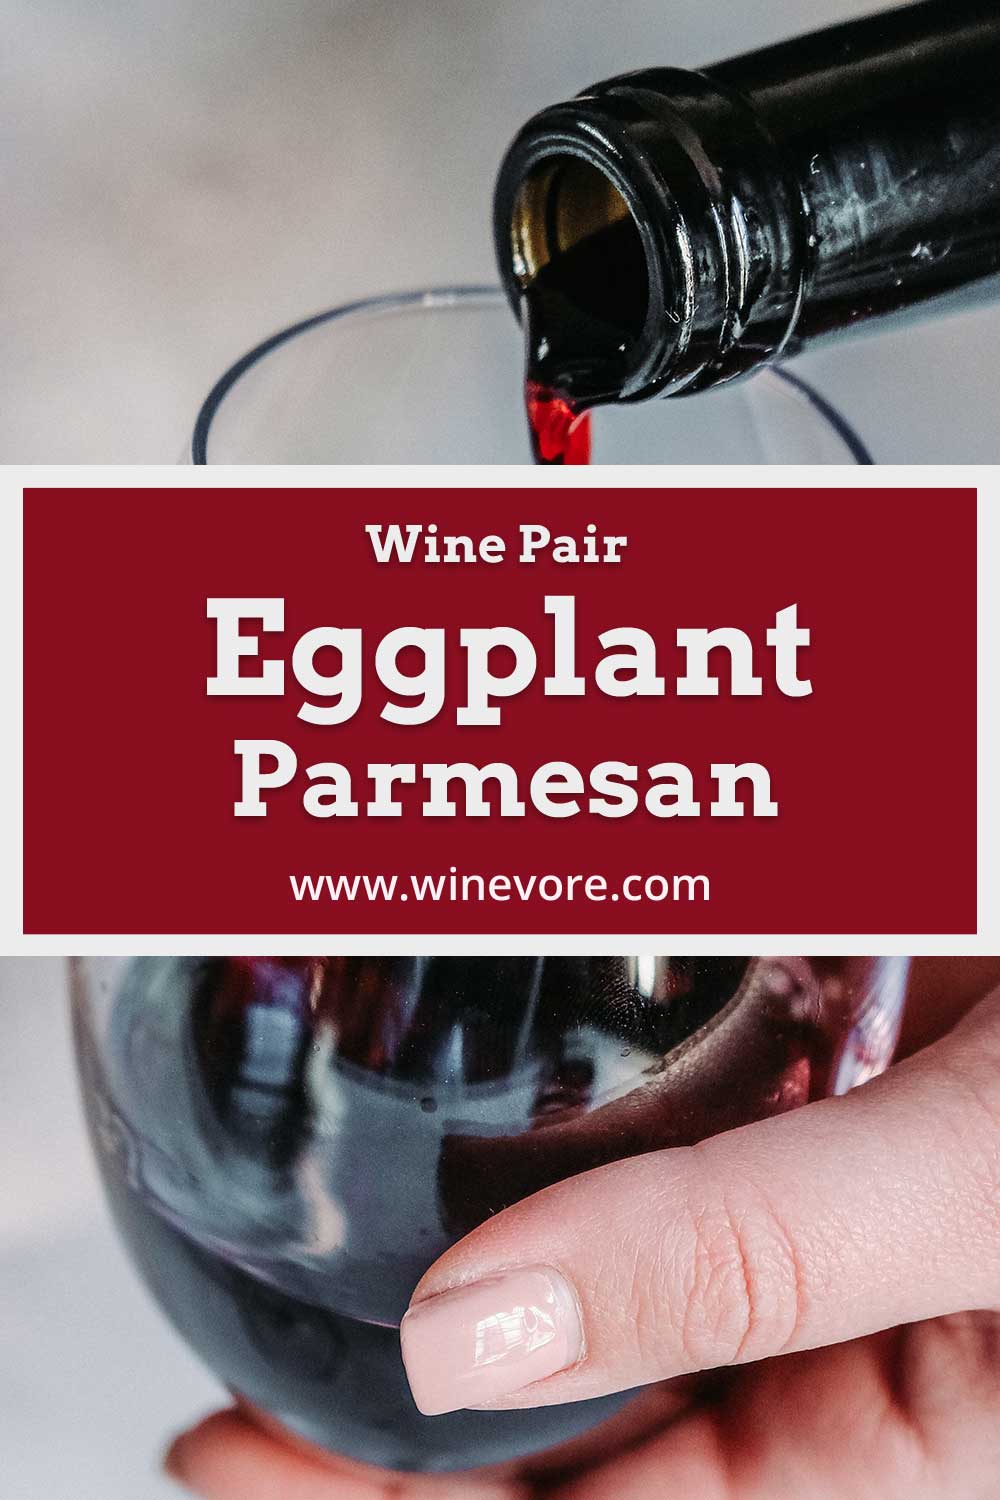 Pouring wine into a glass held by a hand - Wine Pair Eggplant Parmesan.